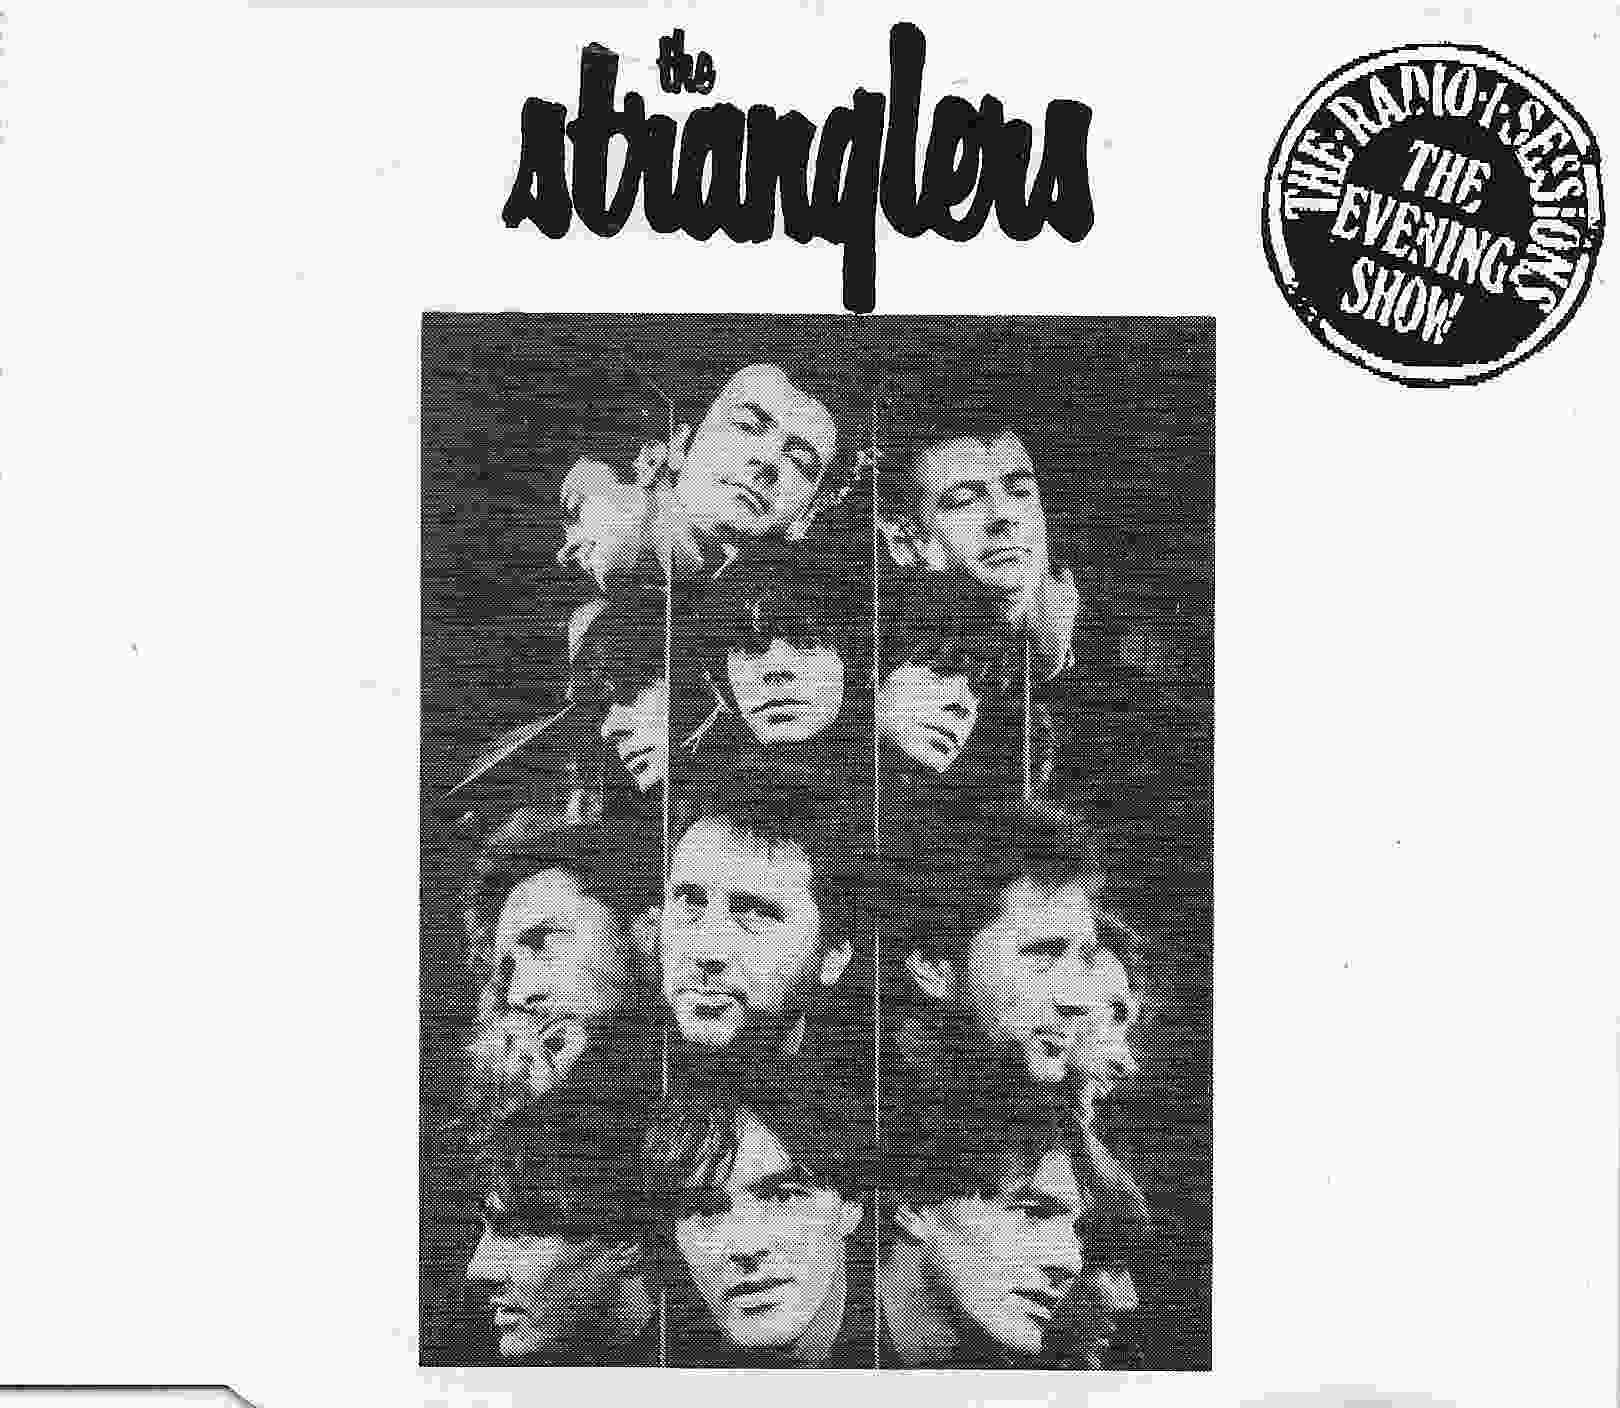 Picture of SFNTCD 020 The Radio 1 sessions - The evening show by artist The Stranglers  from The Stranglers cdsingles